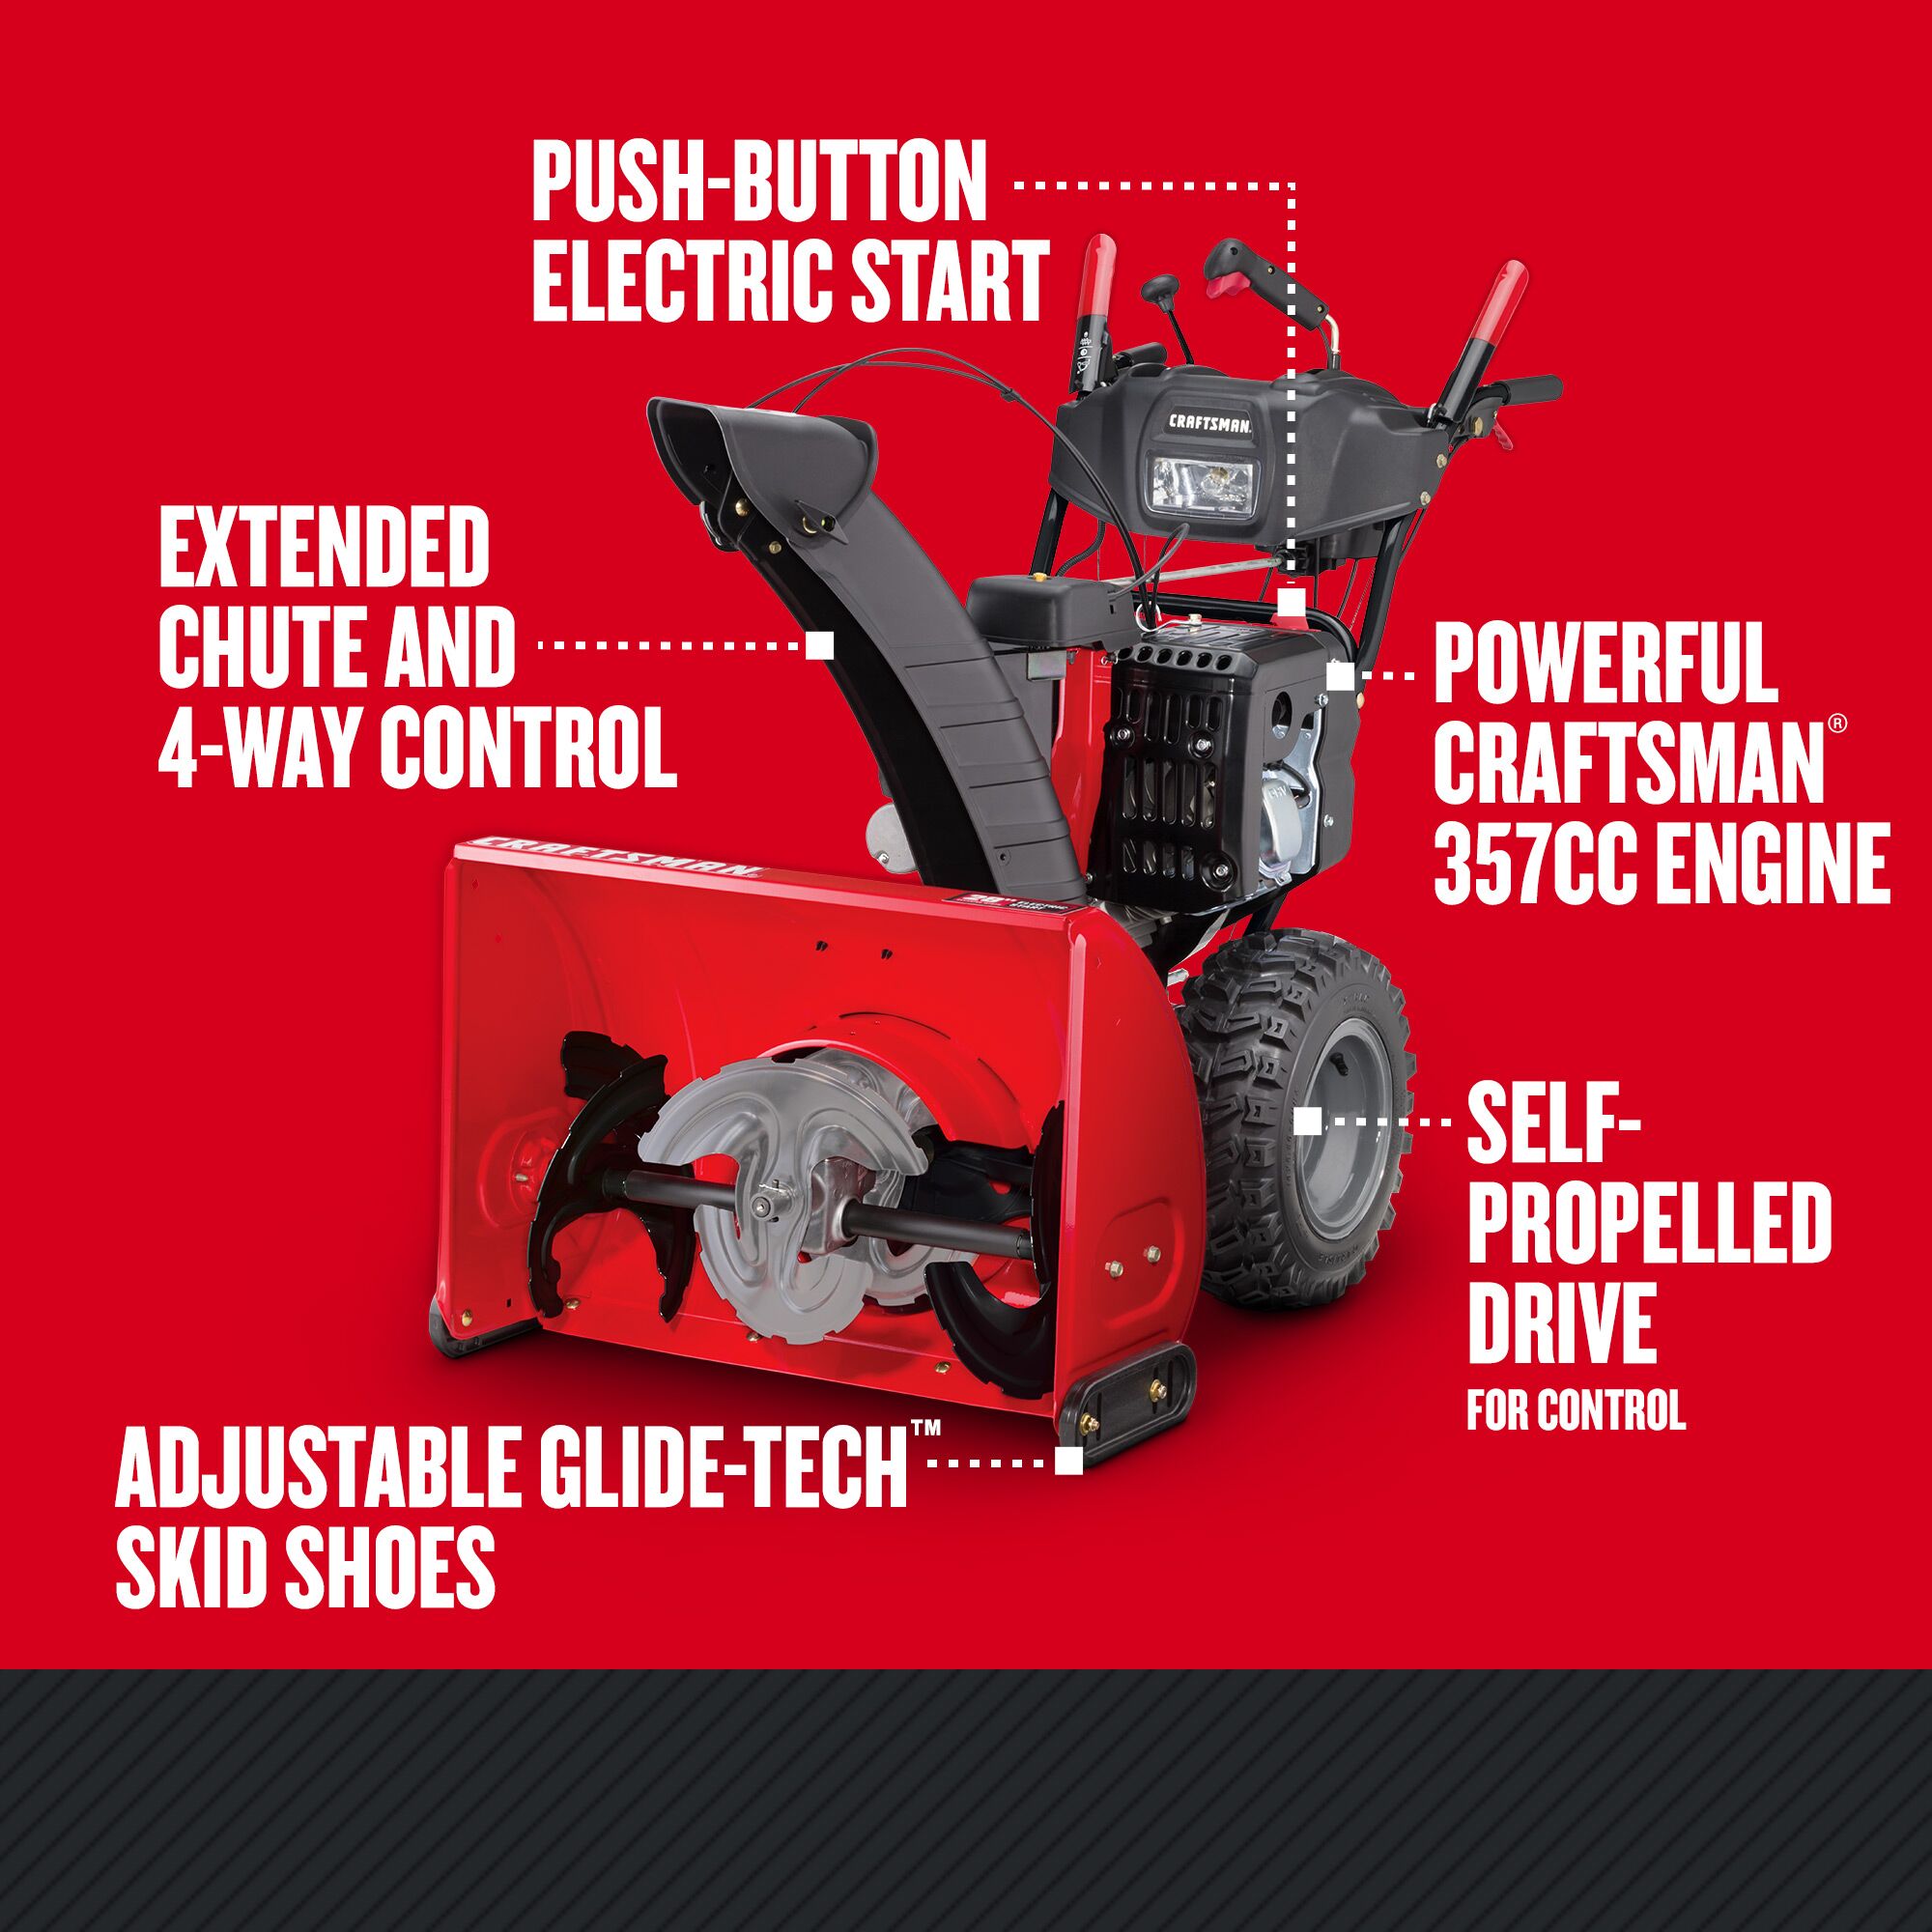 CRAFTSMAN 28-in 357cc Electric Start Three-Stage Snow Blower graphic highlighting key features